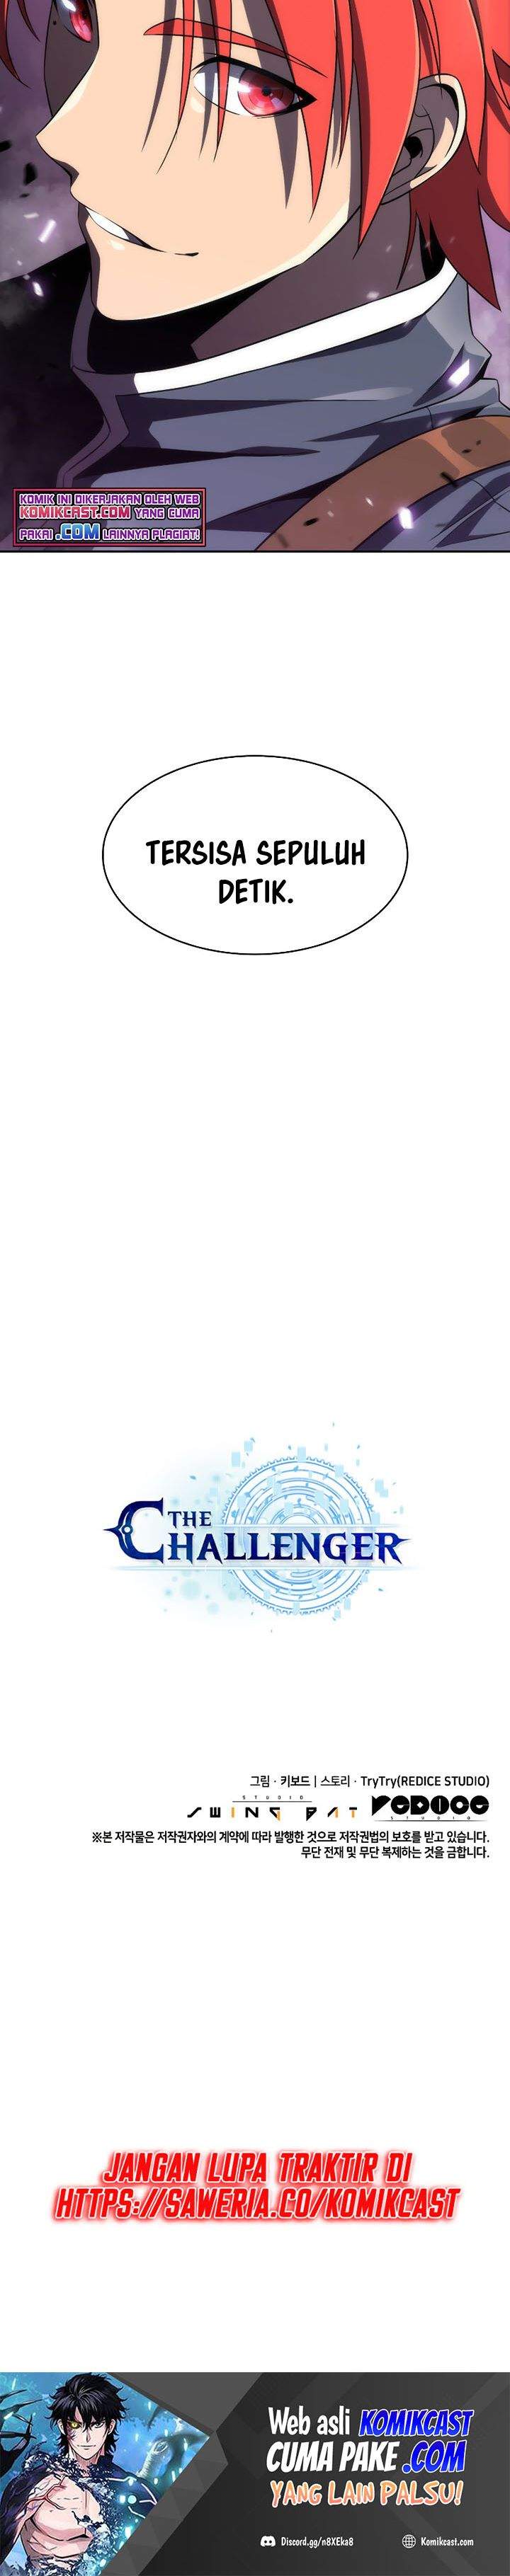 The Challenger Chapter 15